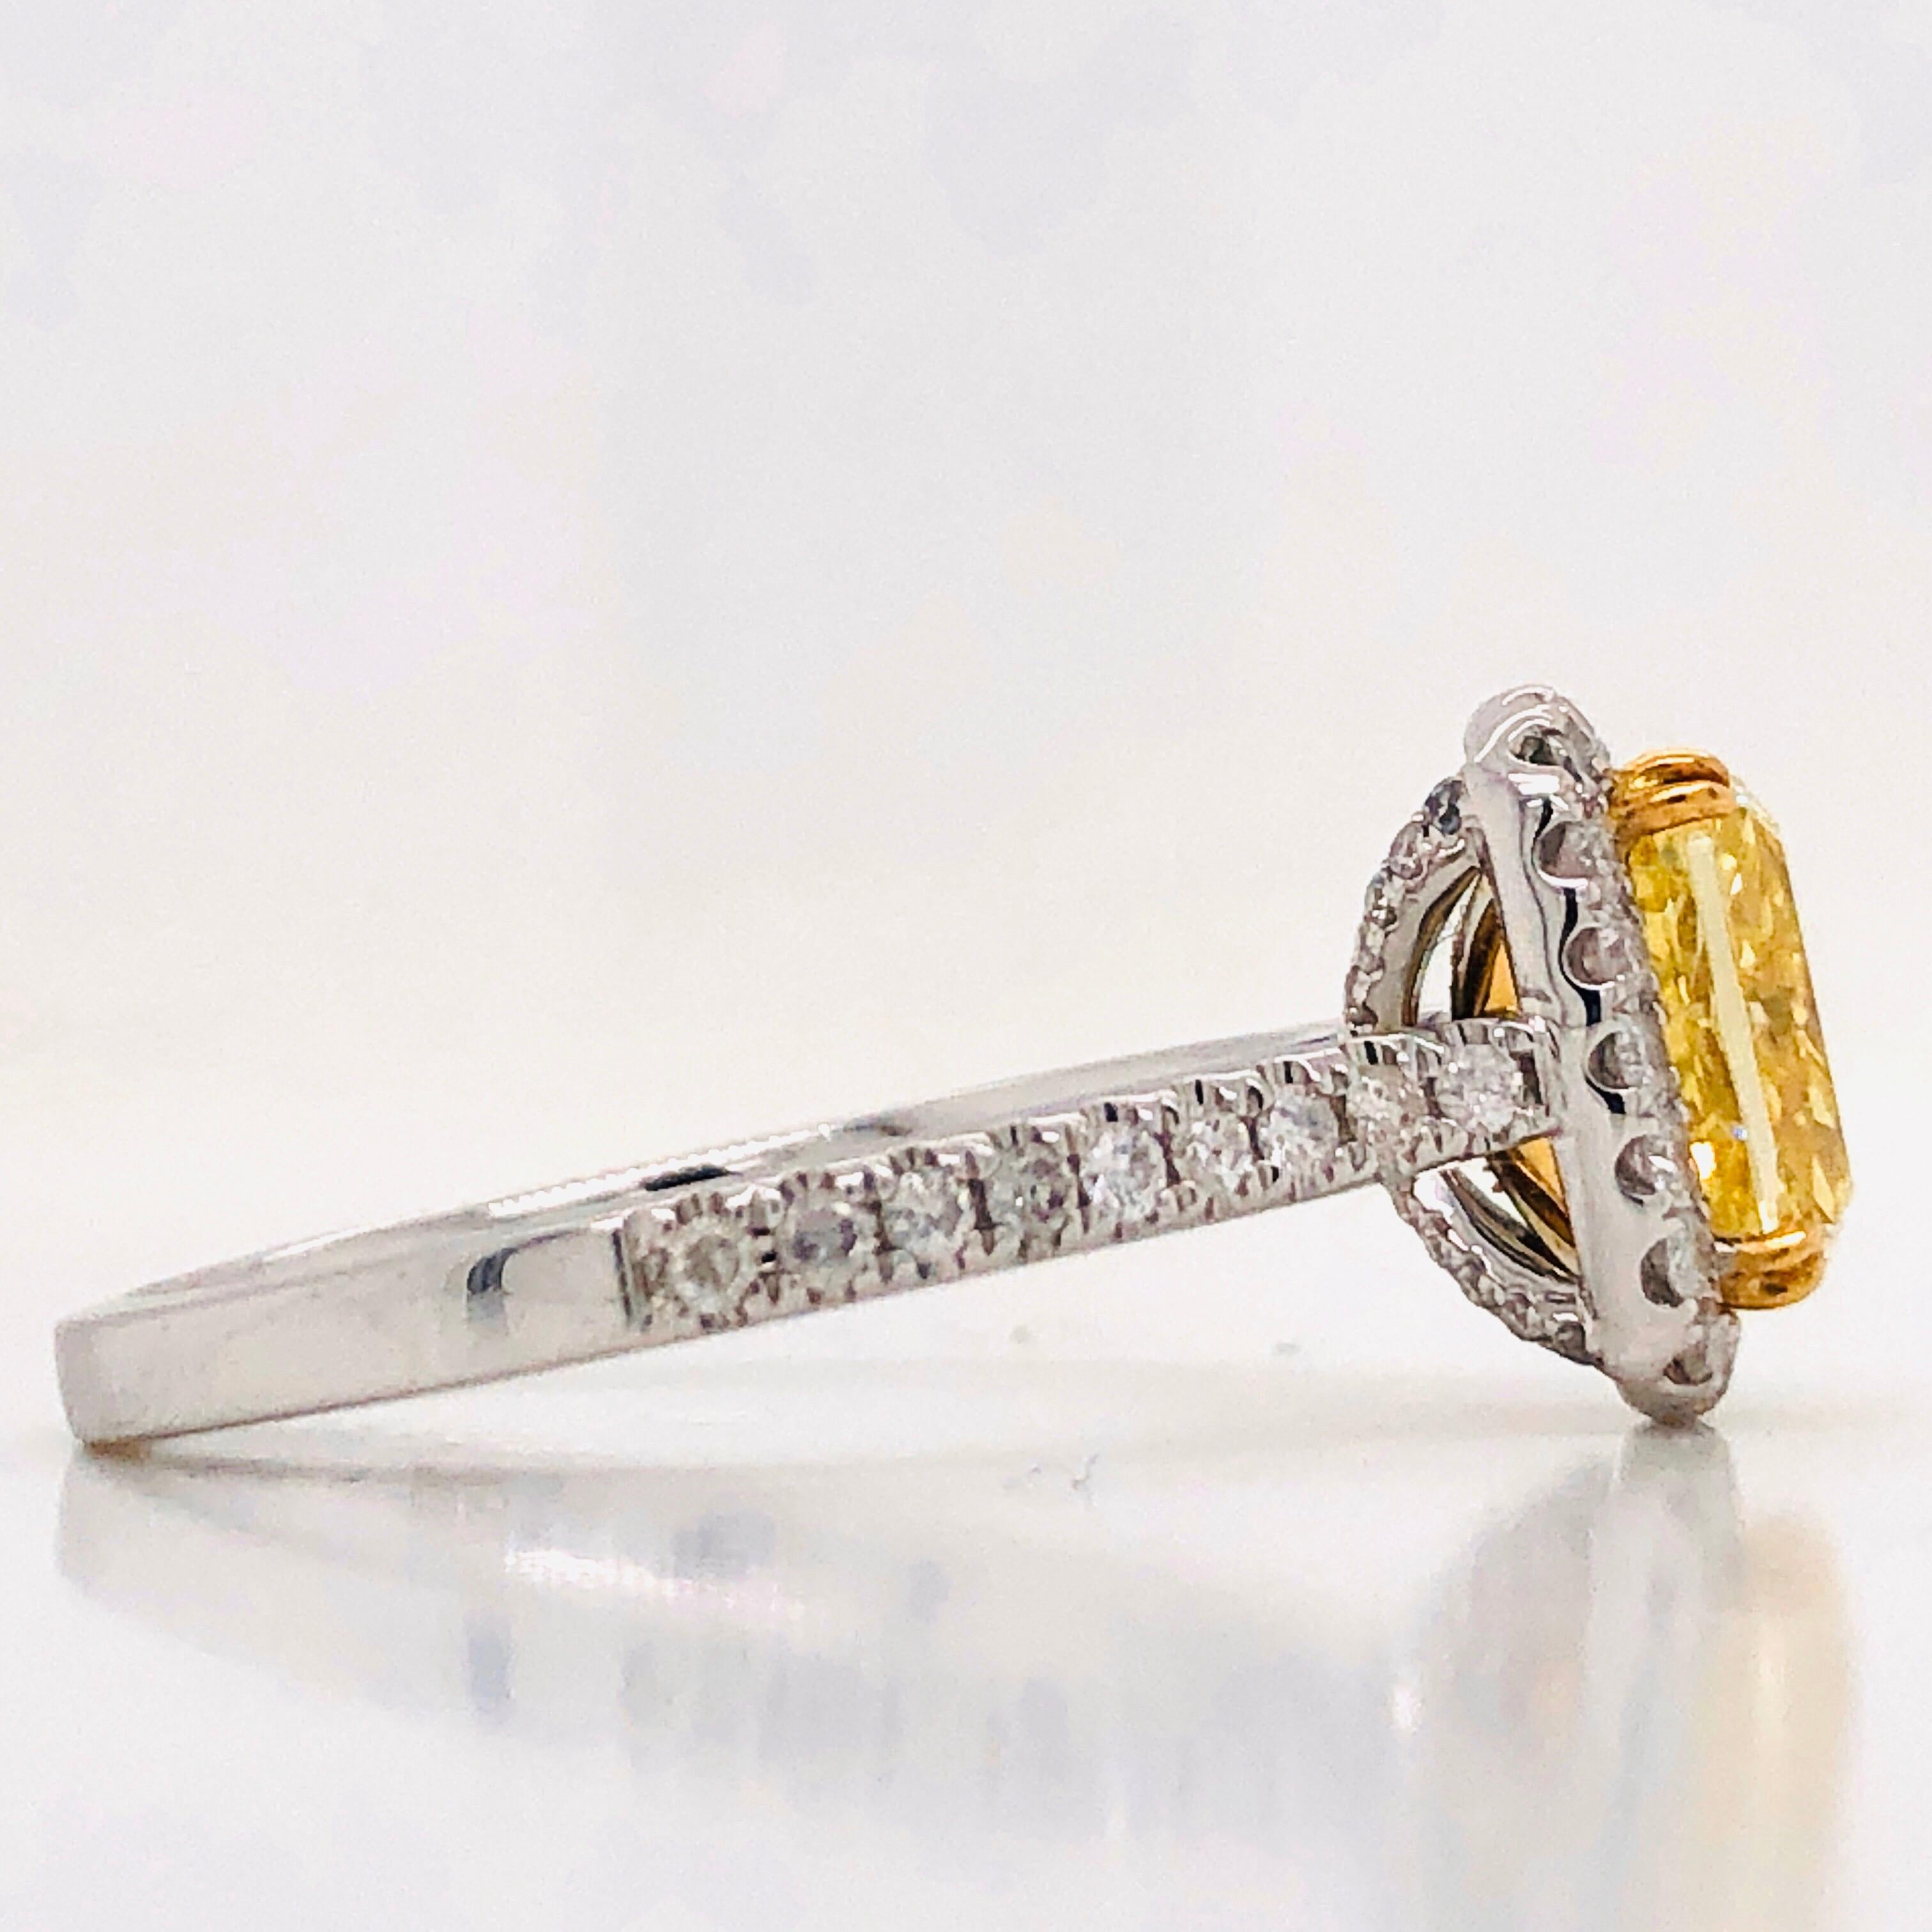 Emilio Jewelry 2.02 Carat GIA Certified Fancy Intense Yellow Diamond Ring
Wear these simple classy earrings to lunch, or casual affair! Made to wear casual or dressed up for any occasion. Hand made in the Emilio Jewelry Atelier, our brand is known